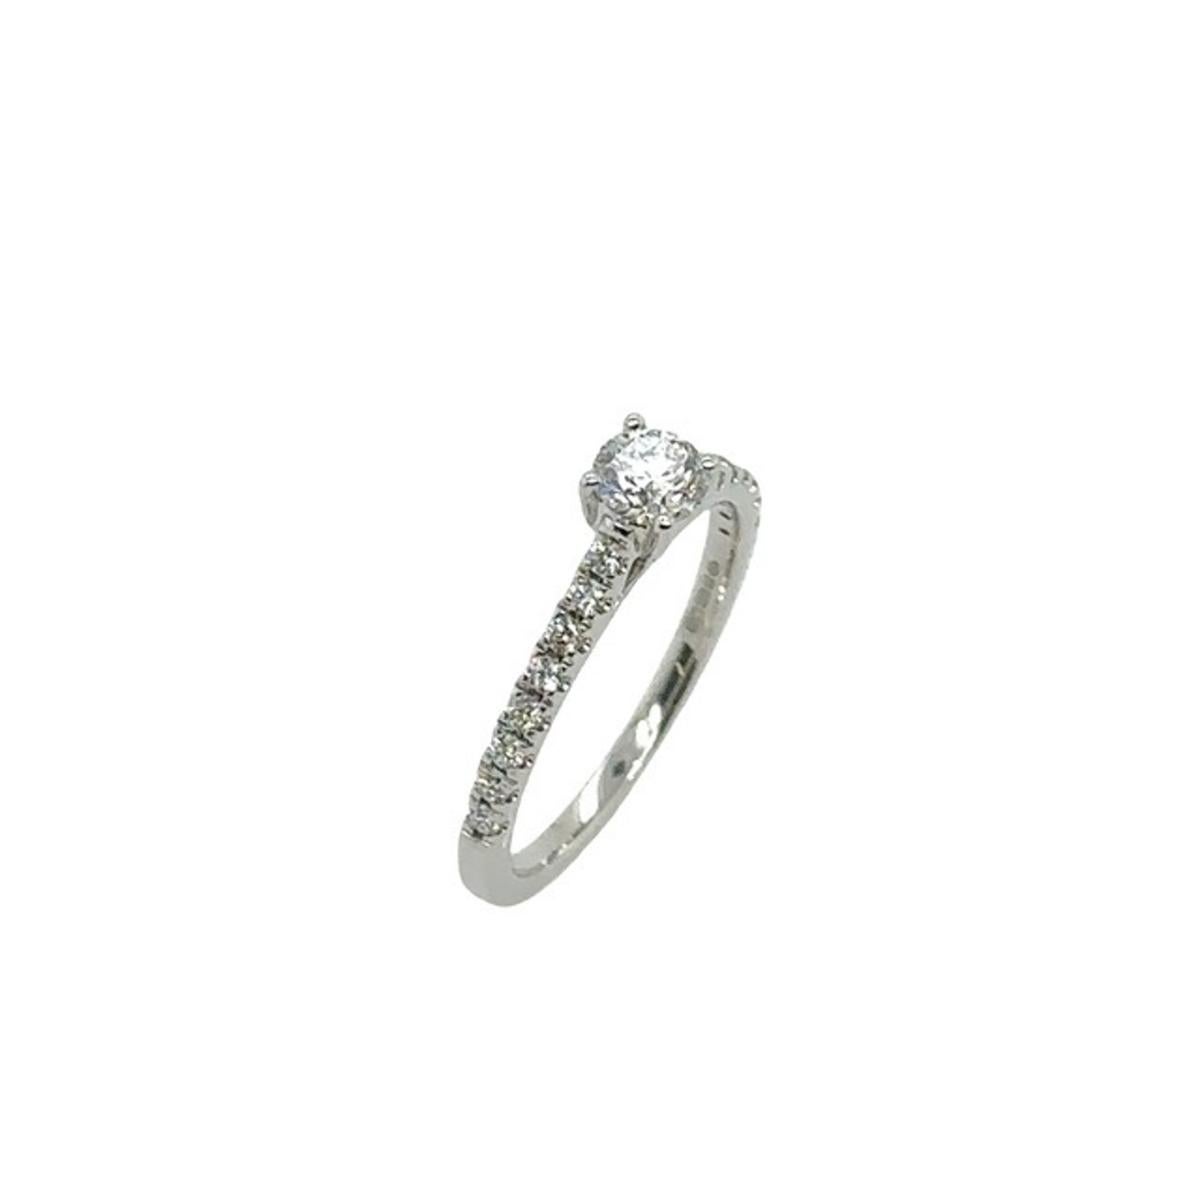 An elegant Diamond ring for your engagement, set with 0.30ct round brilliant cut natural Diamond main stone in 18ct White Gold 4 claw setting, and 16 Diamonds on shoulders, 0.10ct .

Additional Information:
Total Diamond Weight: 0.30ct &